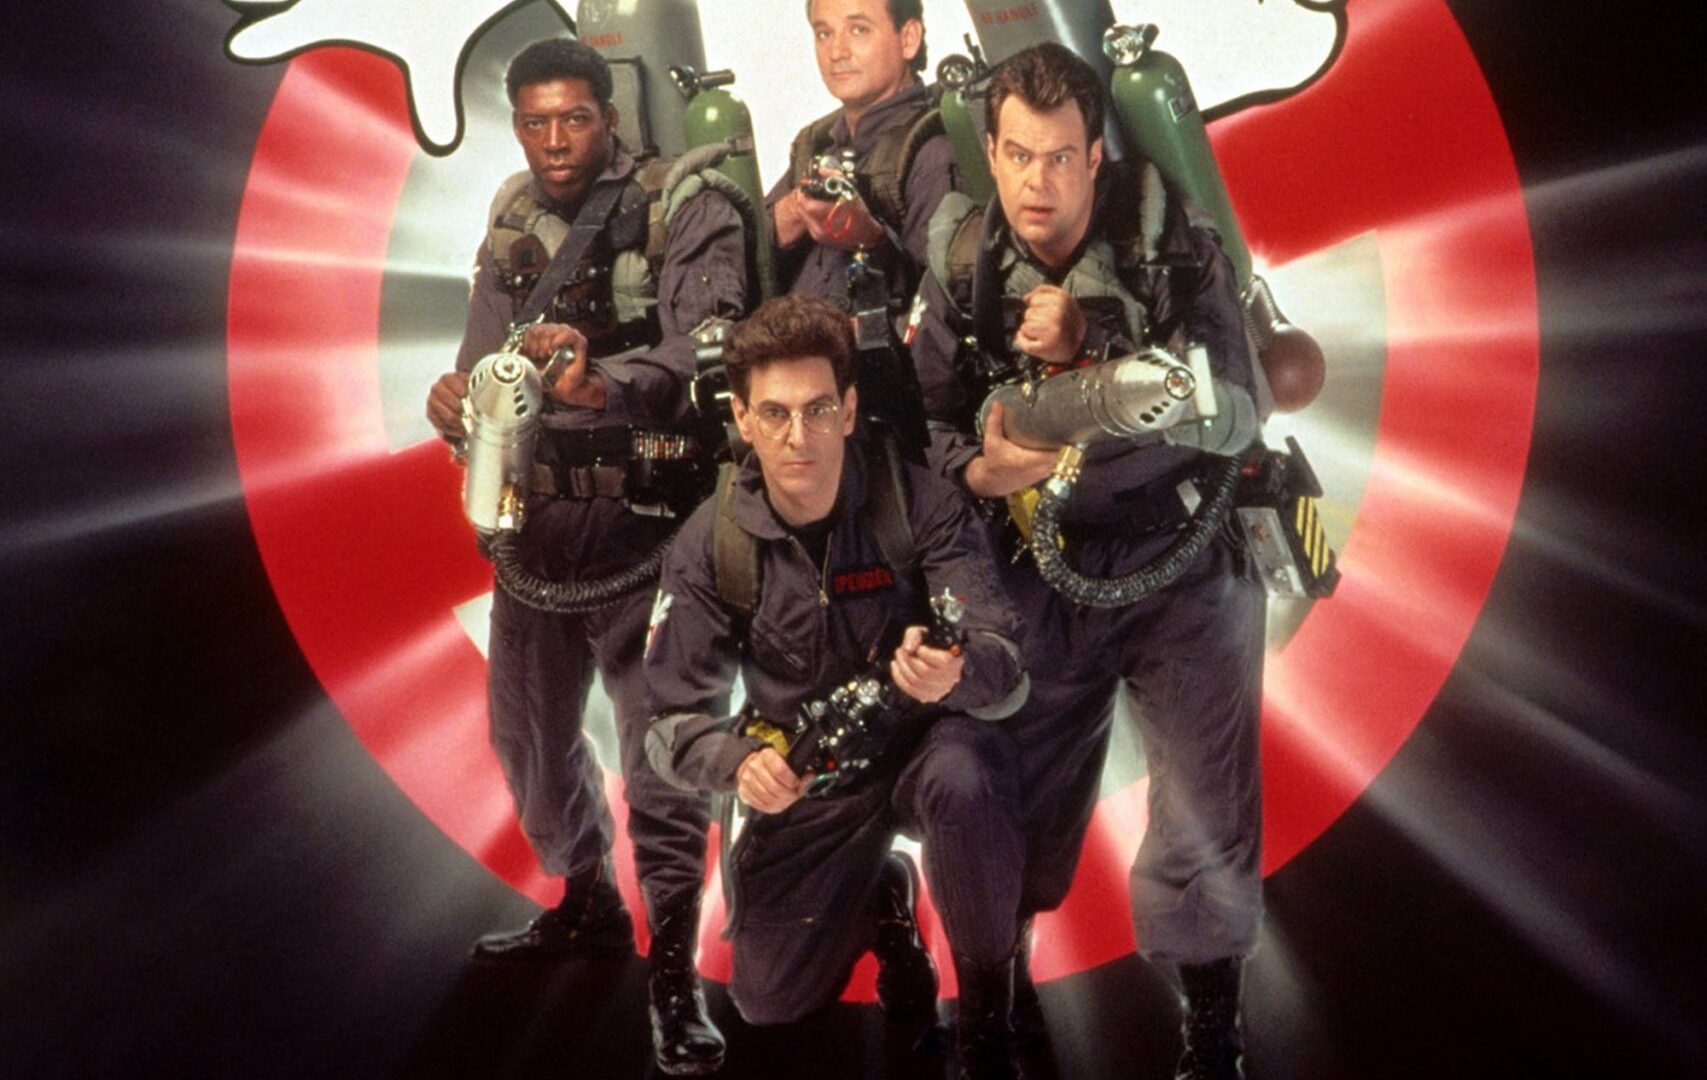 Movie poster for Ghostbusters 2